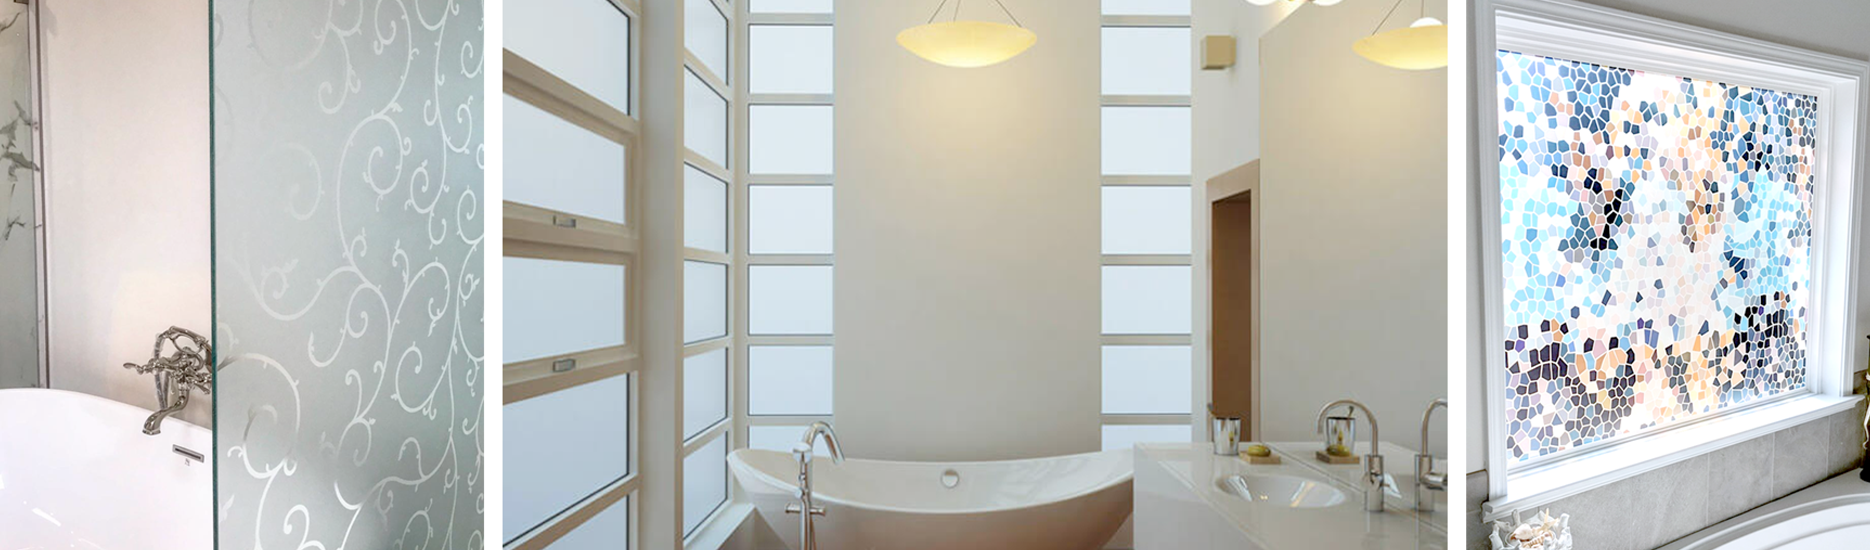 Bathroom Privacy Window Film Options for Your Norman Home